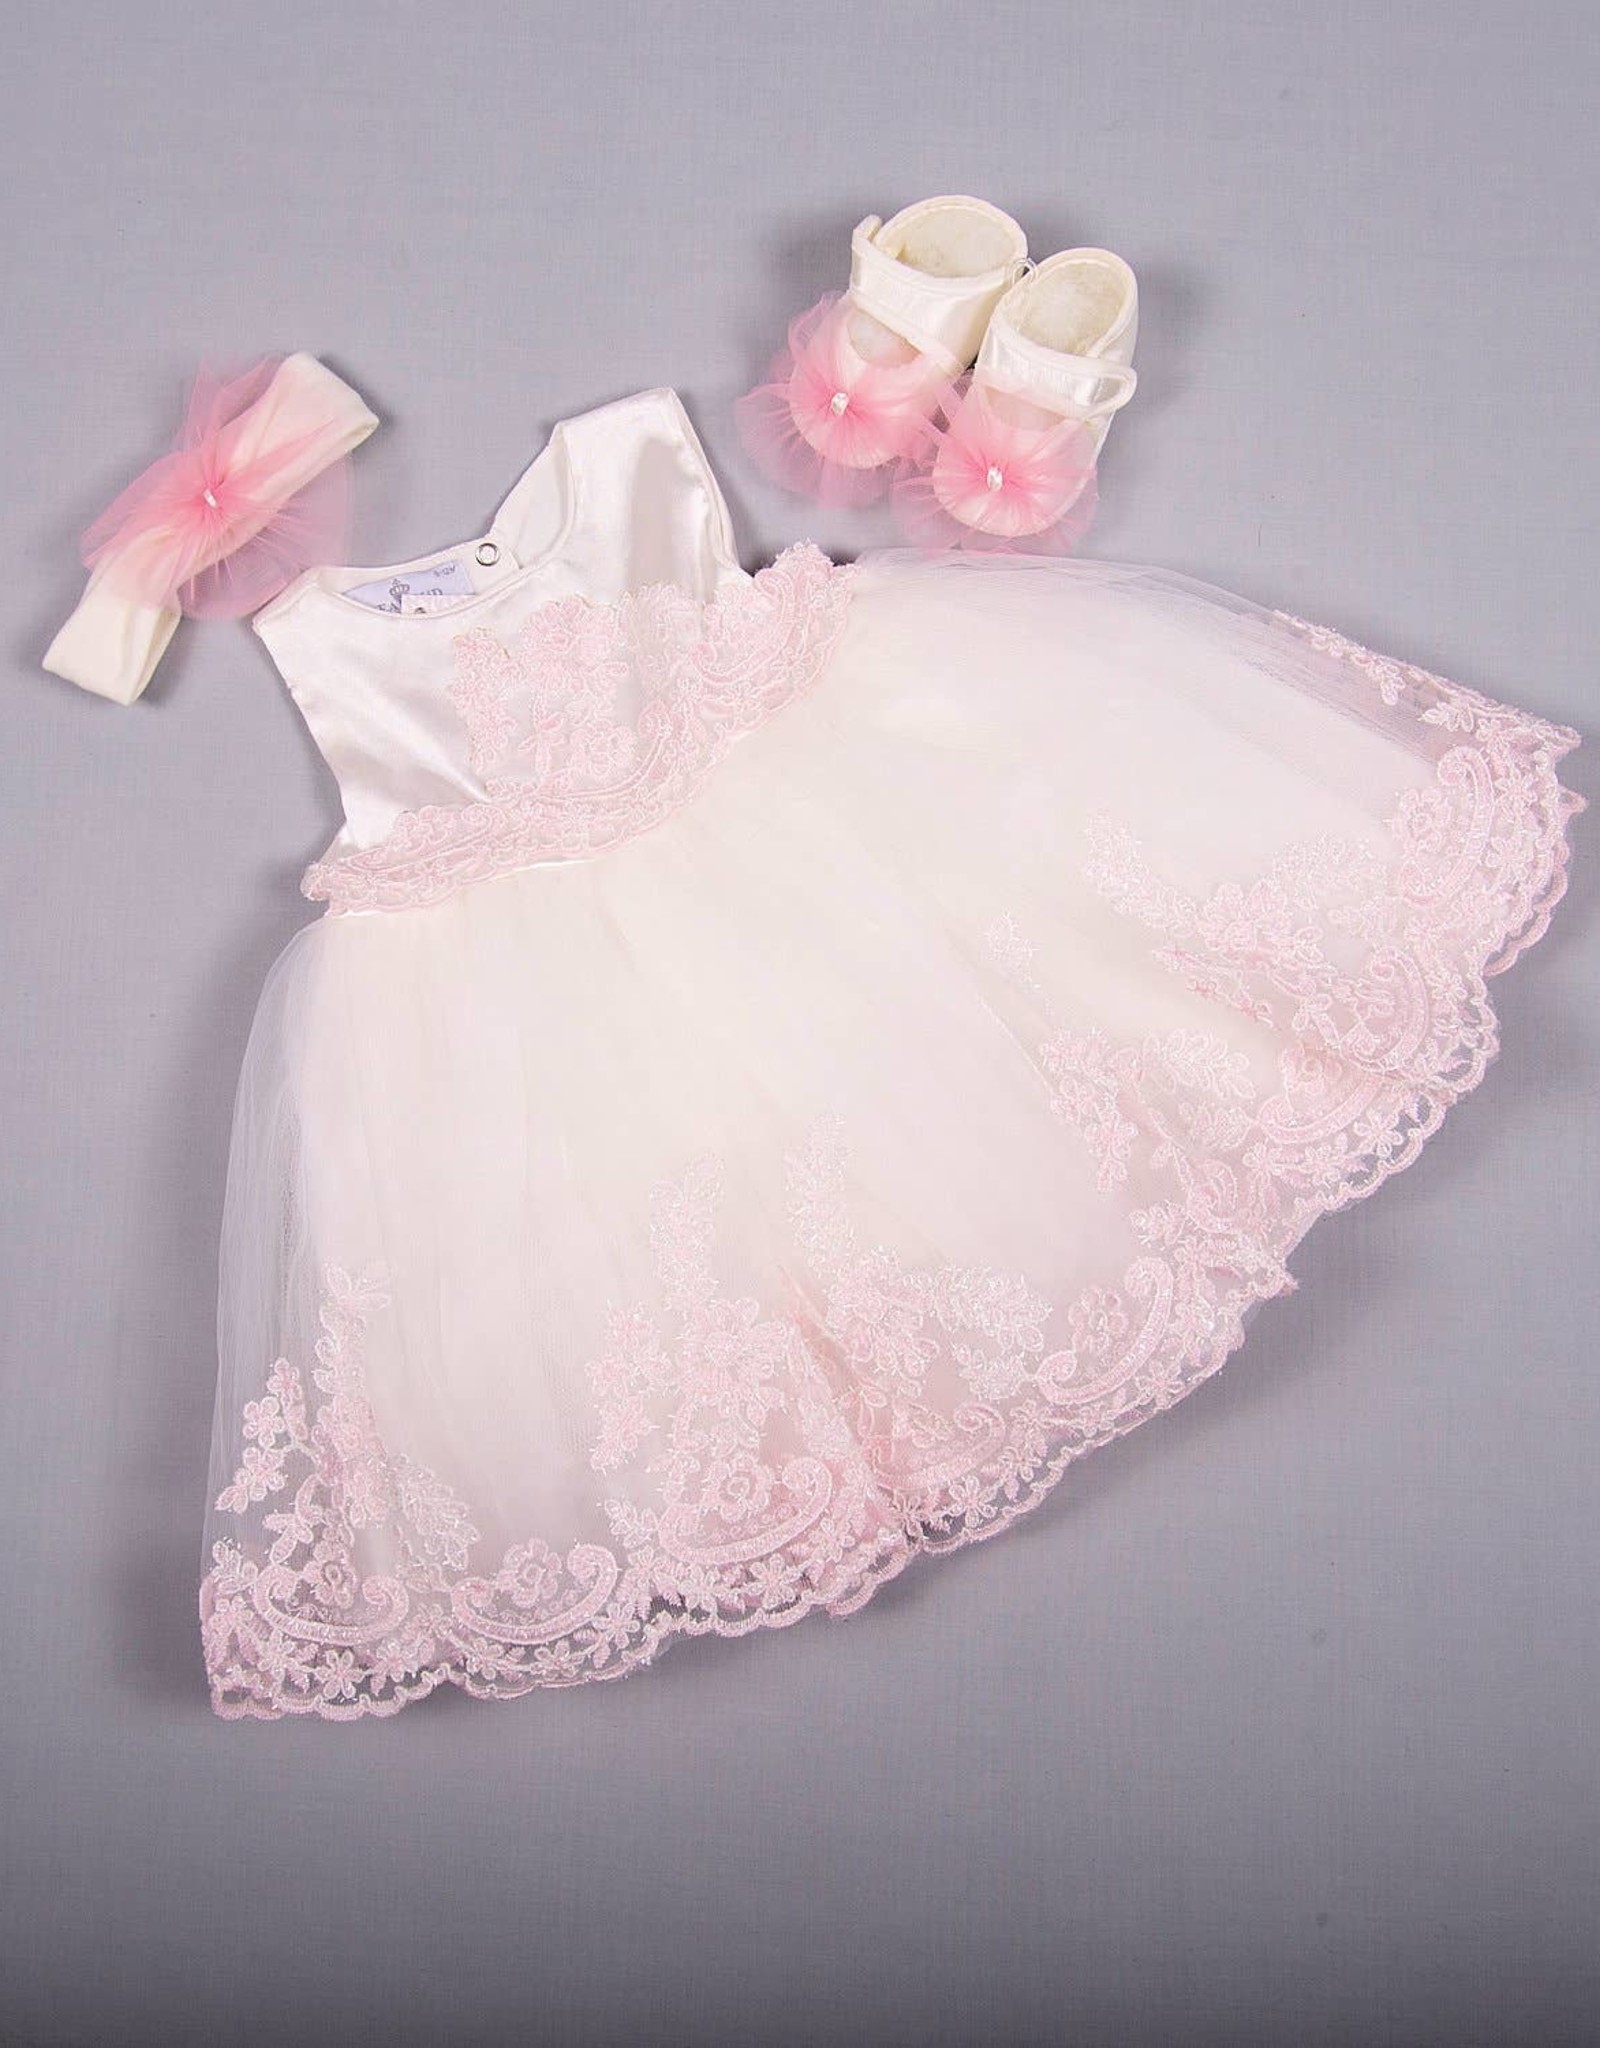 Baby pink special occasion lace dress/headband/booties 3-6Months